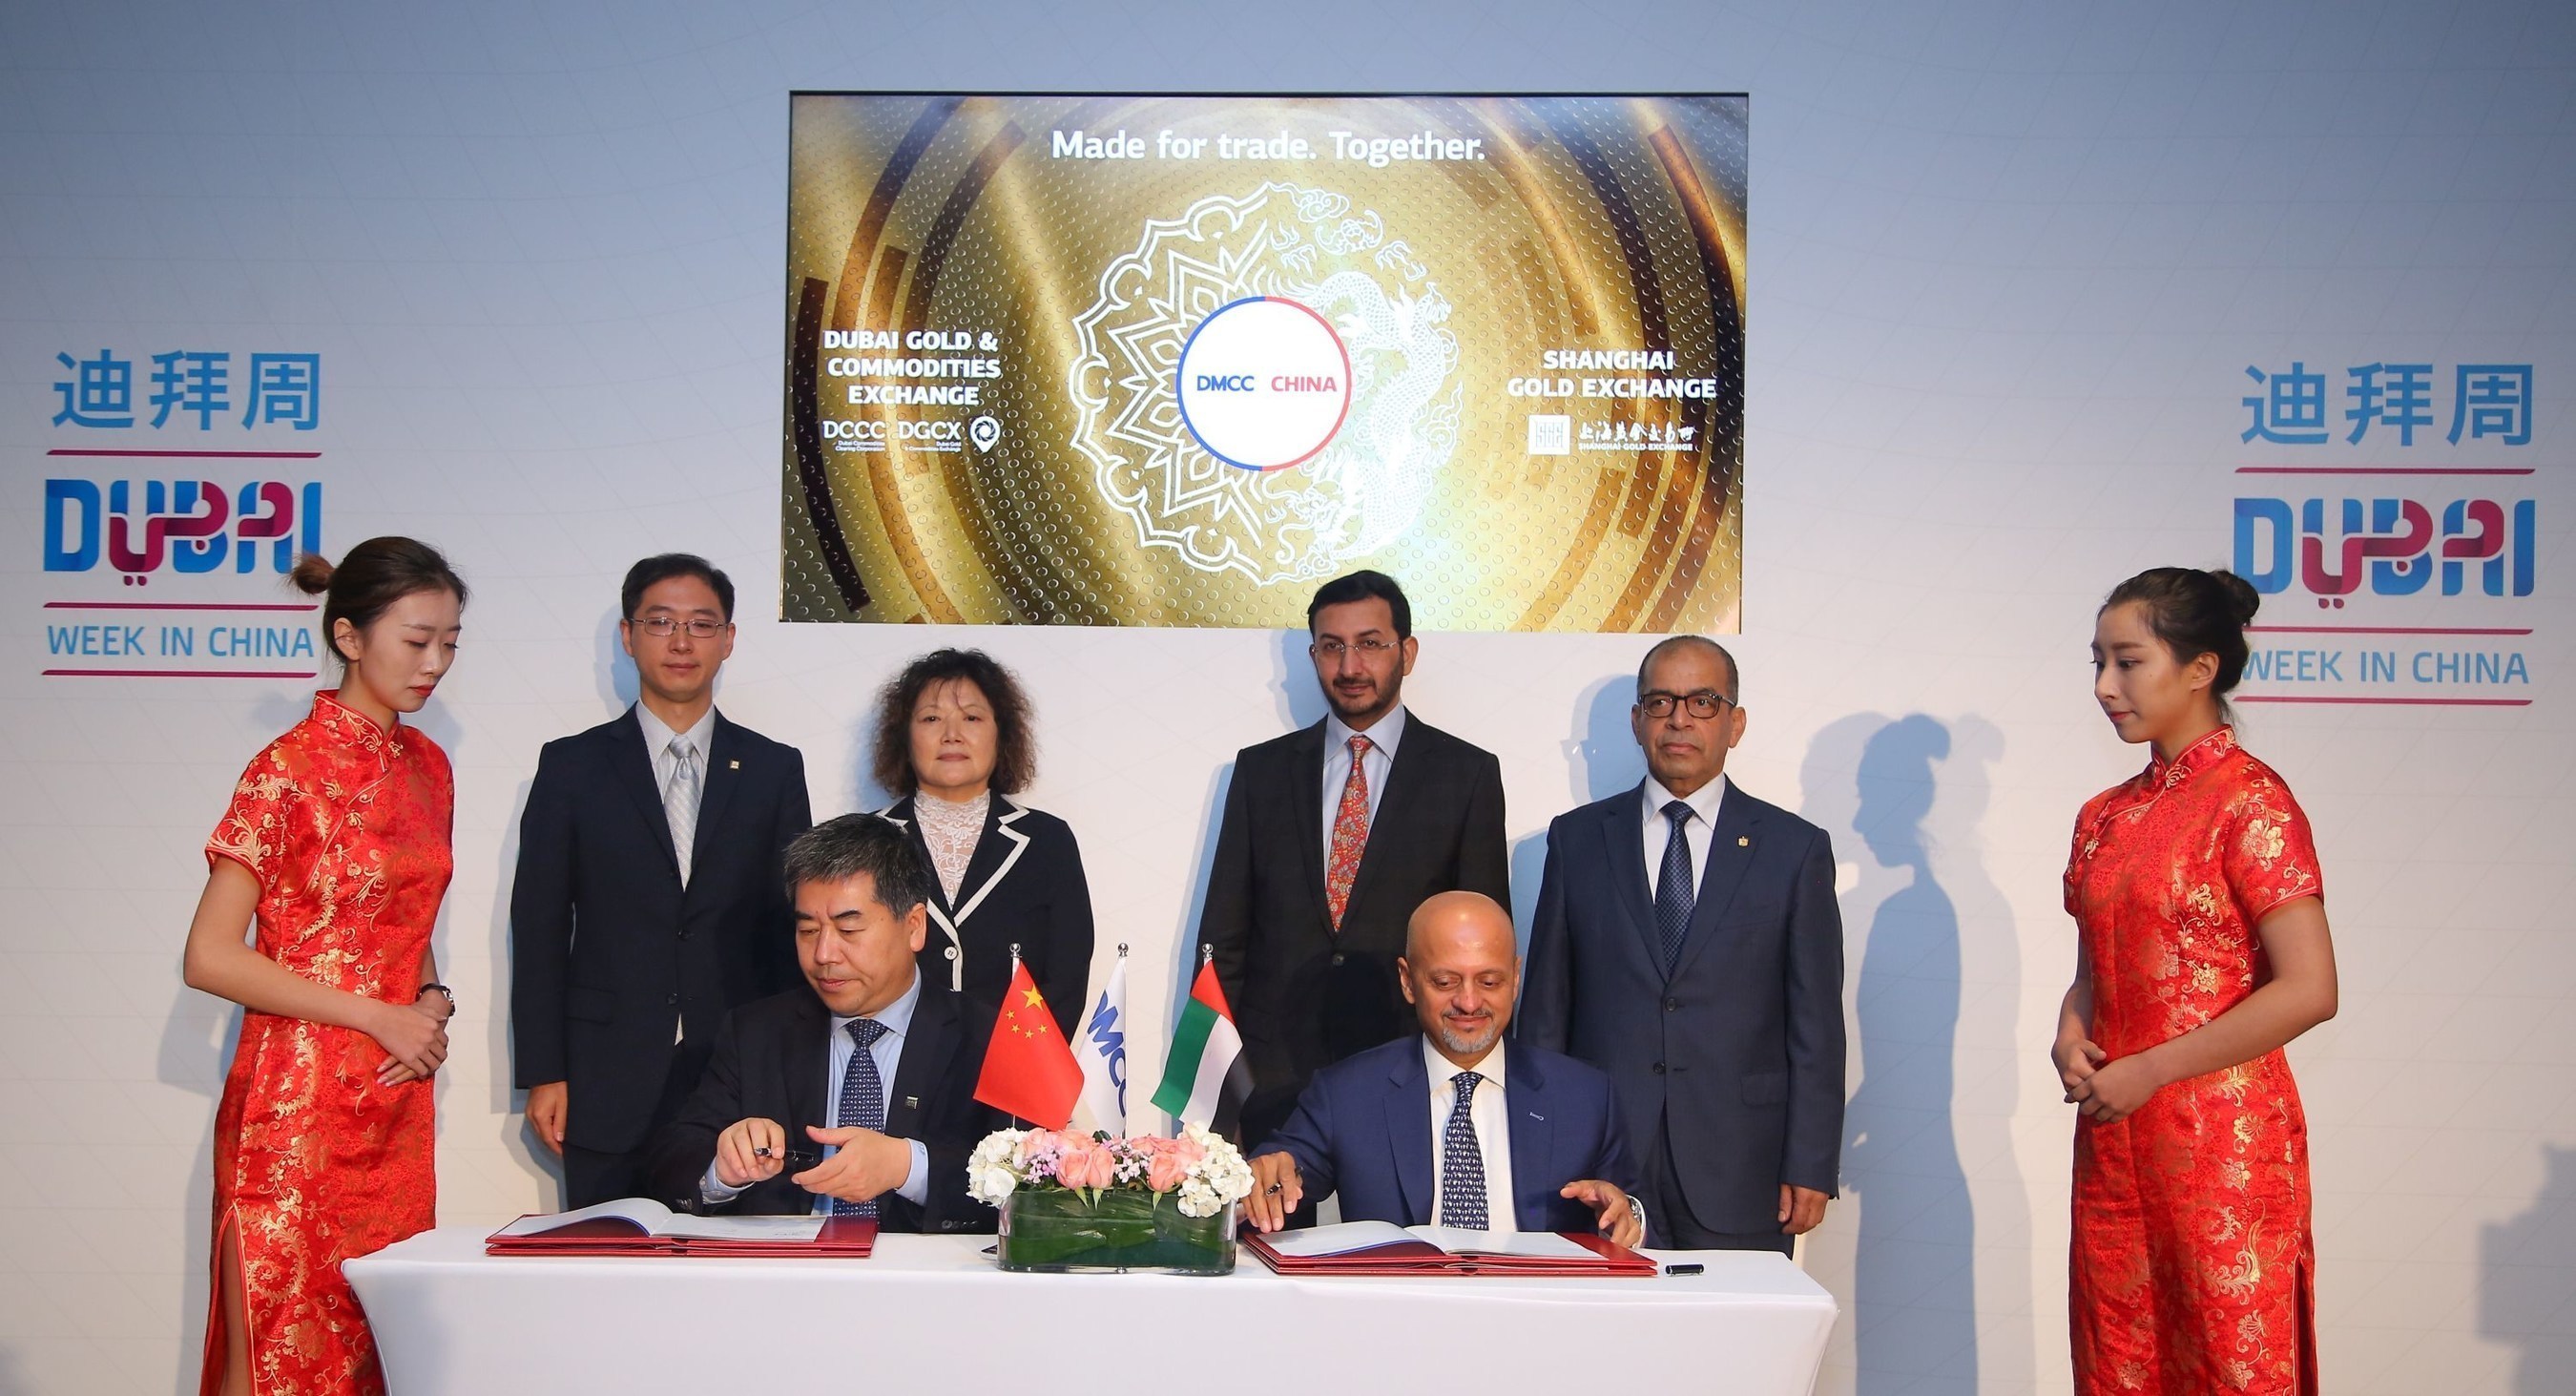 DMCC, DGCX and Shanghai Gold Exchange sign trade agreement at Dubai Week in China witnessed by His Excellency Abdulla Al Saleh, Under Secretary of the UAE Ministry of Economy for Foreign Trade and Industry Affairs (PRNewsFoto/DMCC)